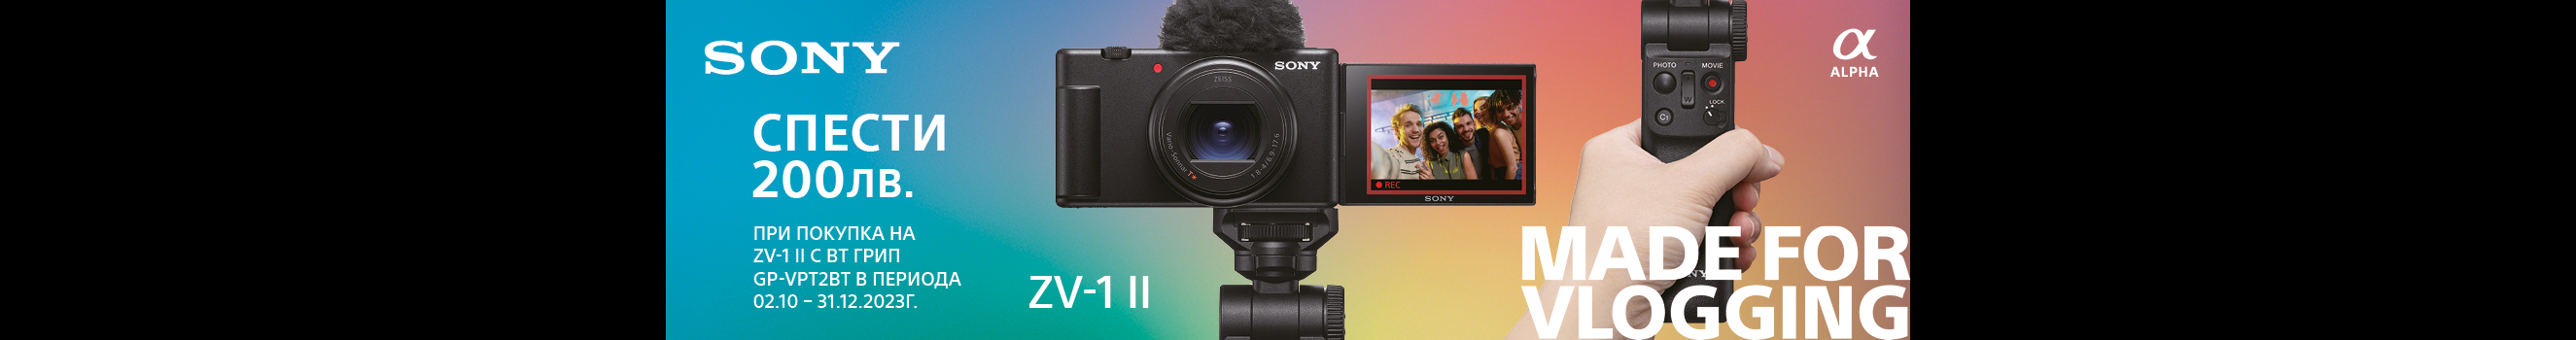  Get Sony ZV-1 II camera with free grip in PhotoSynthesis Stores